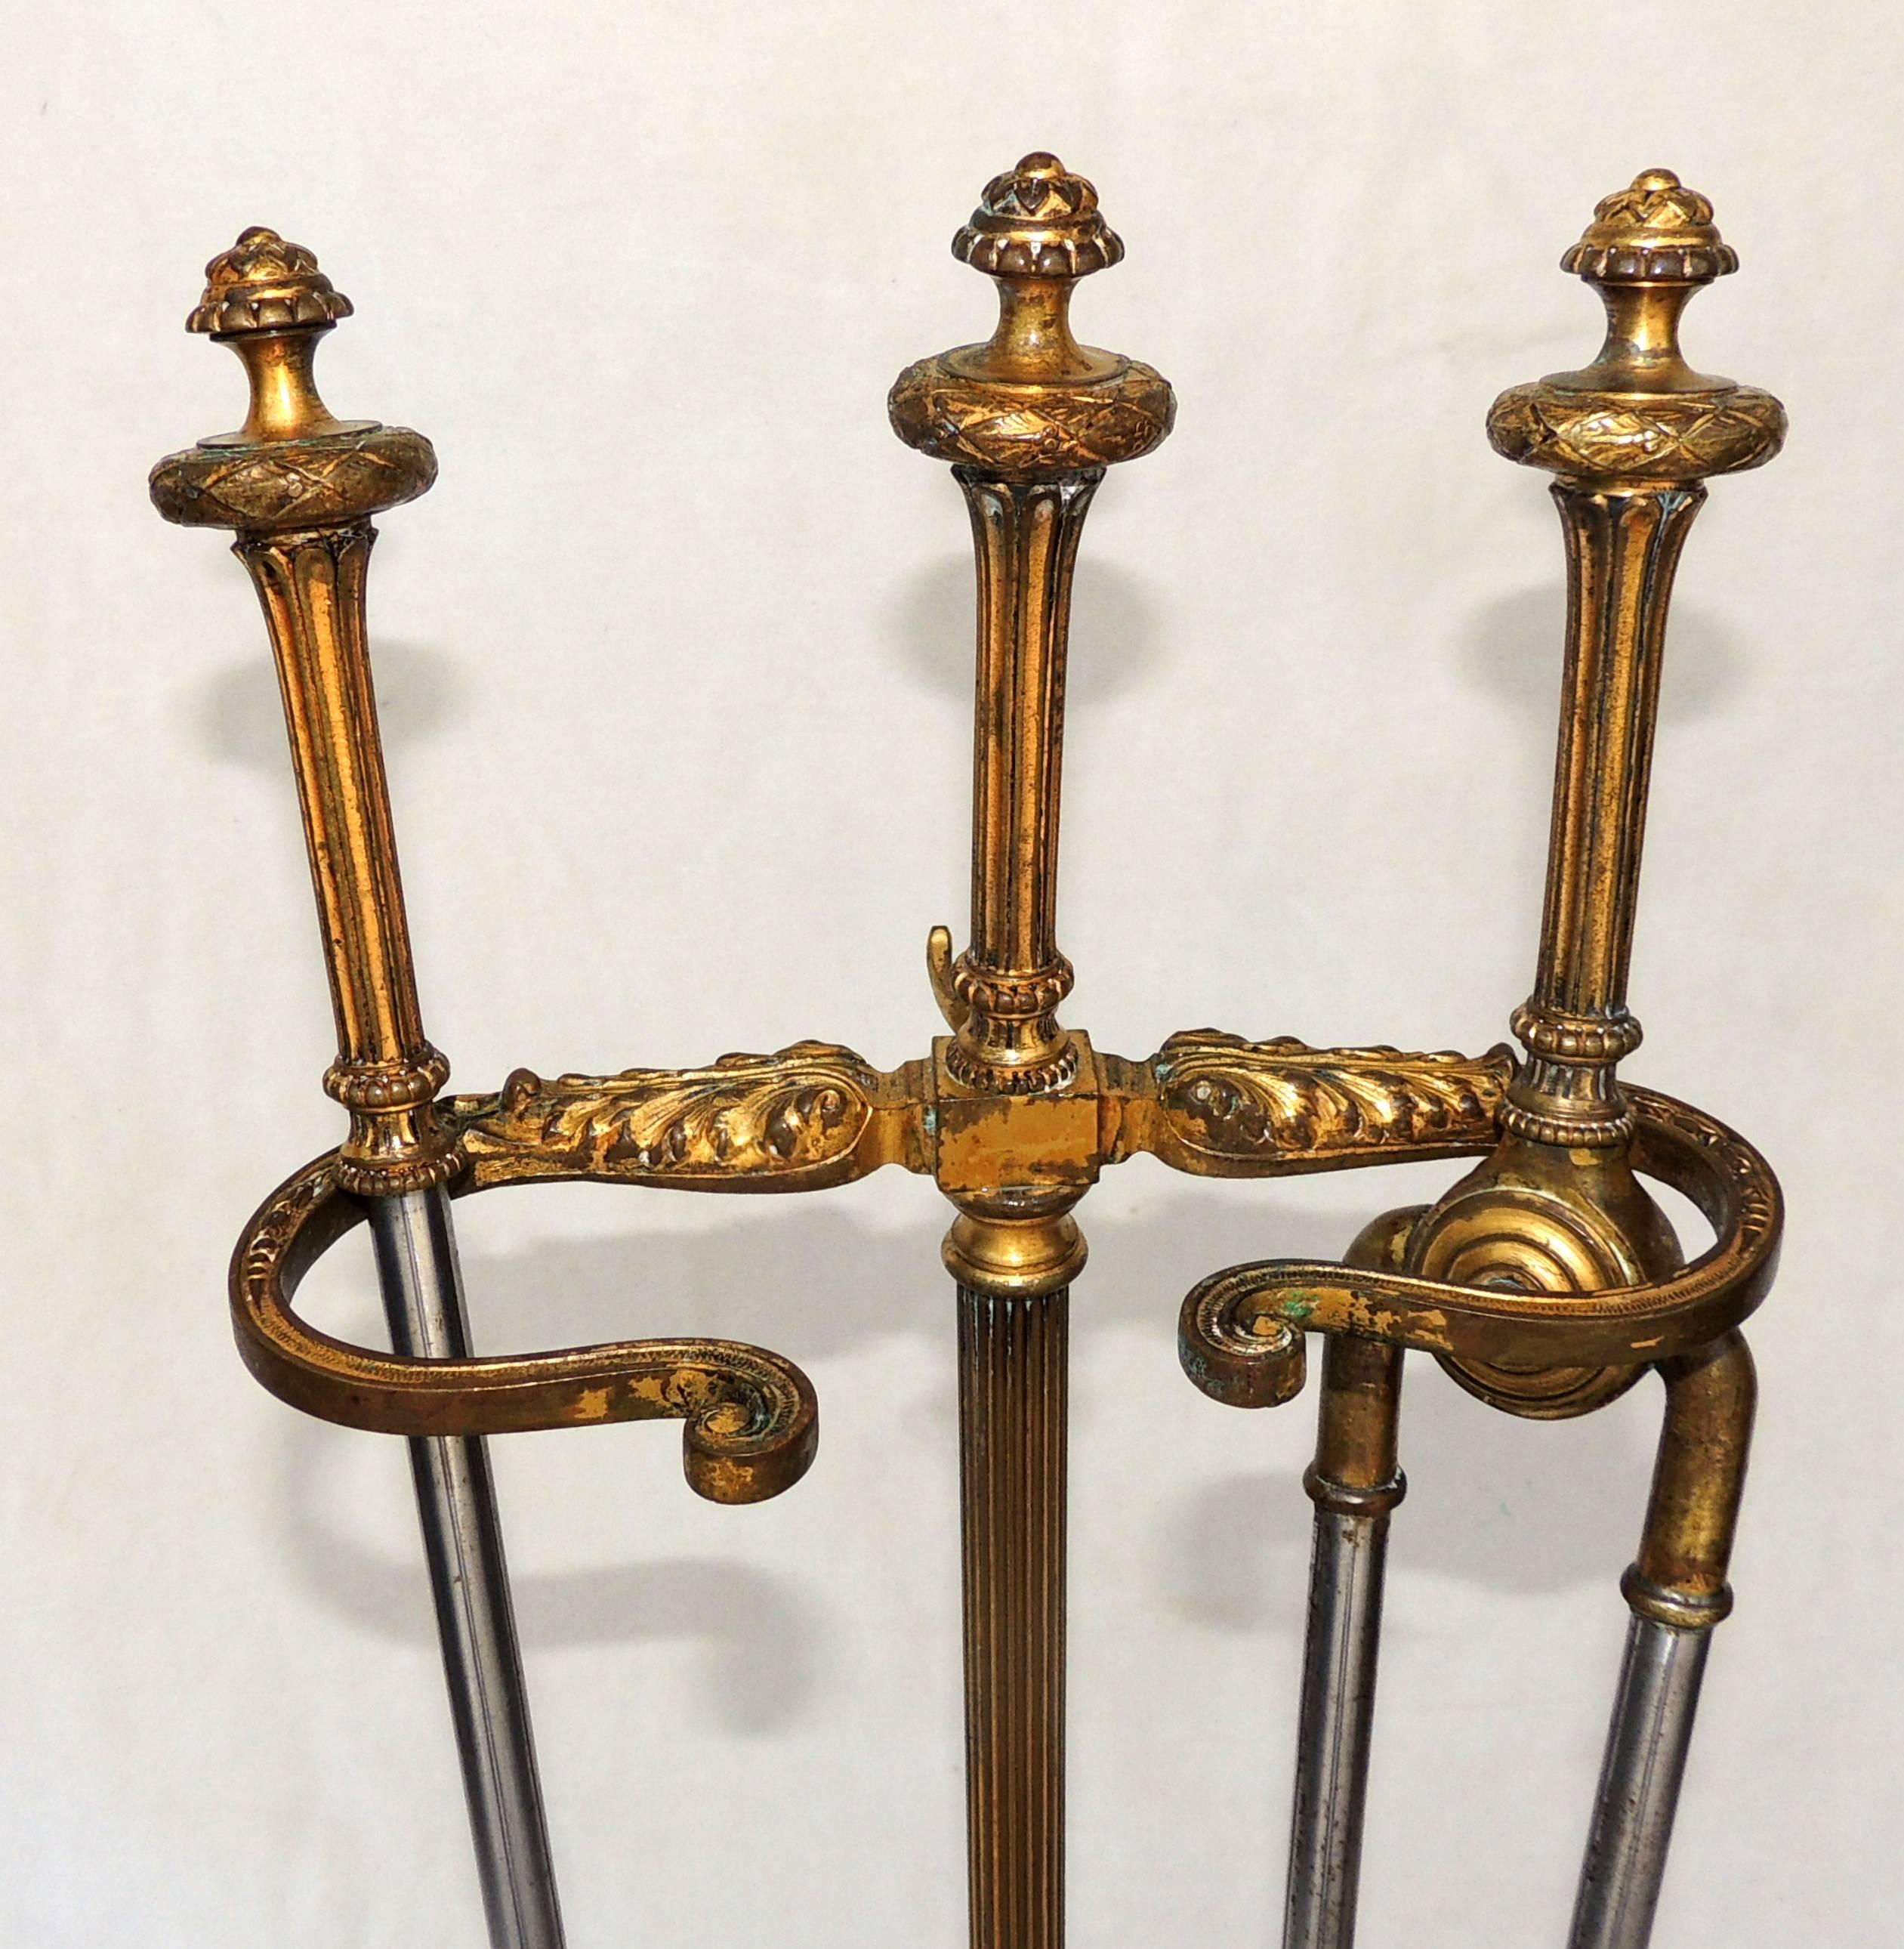 A wonderful French gilt bronze fire place three-piece tool set in the neoclassical design in the manner of Caldwell with garland swags and finials. Consisting of poker, stand, plier with steel shaft.